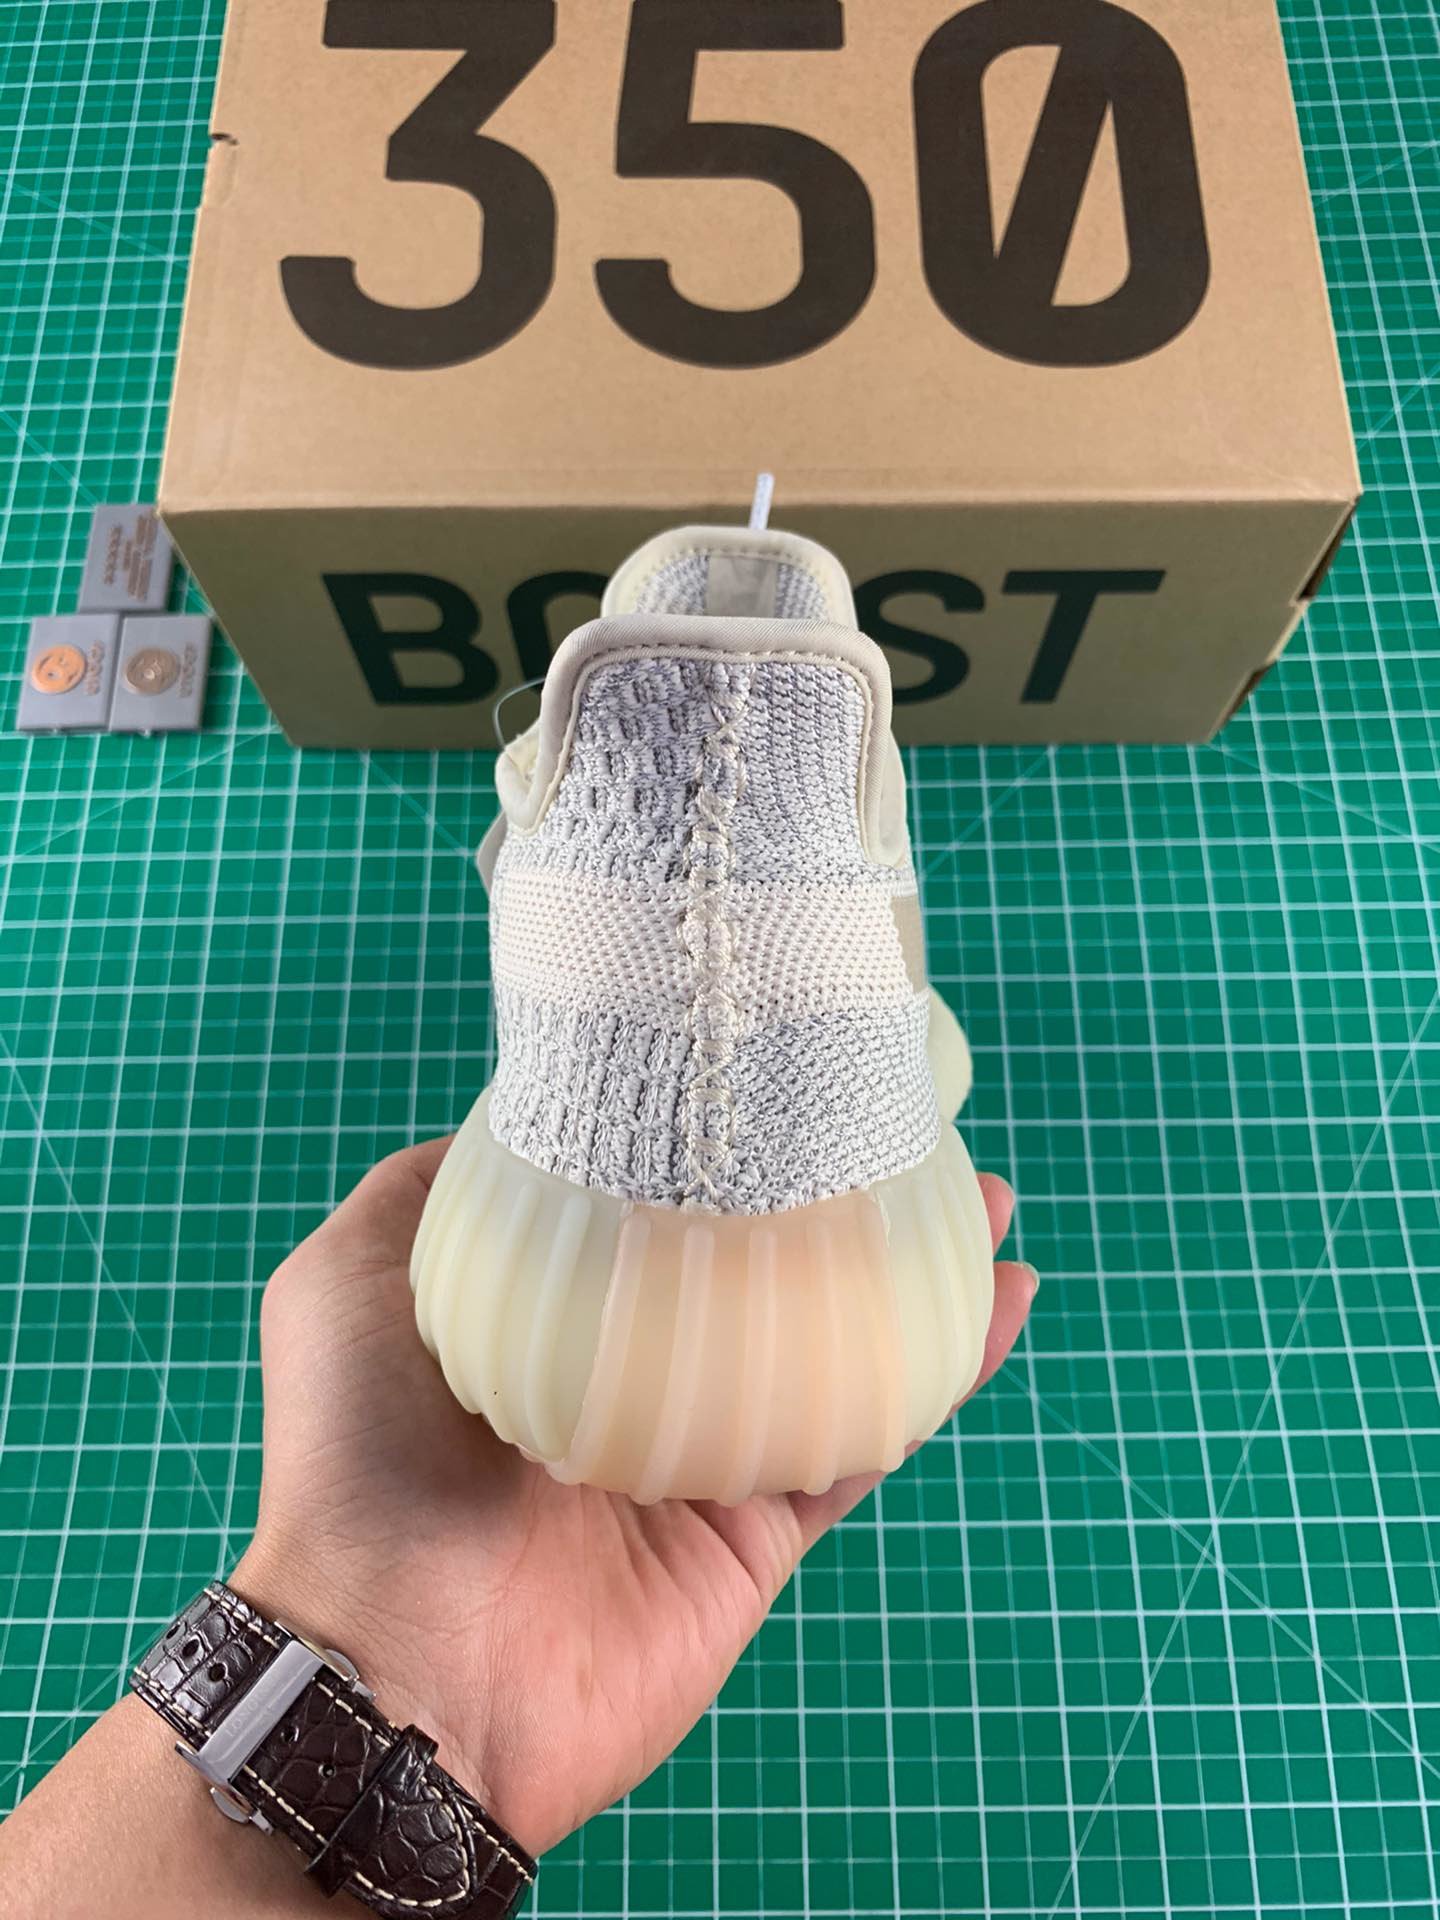 Cheap Adidas Yeezy Boost 350 V2 Pure Oat Preorder